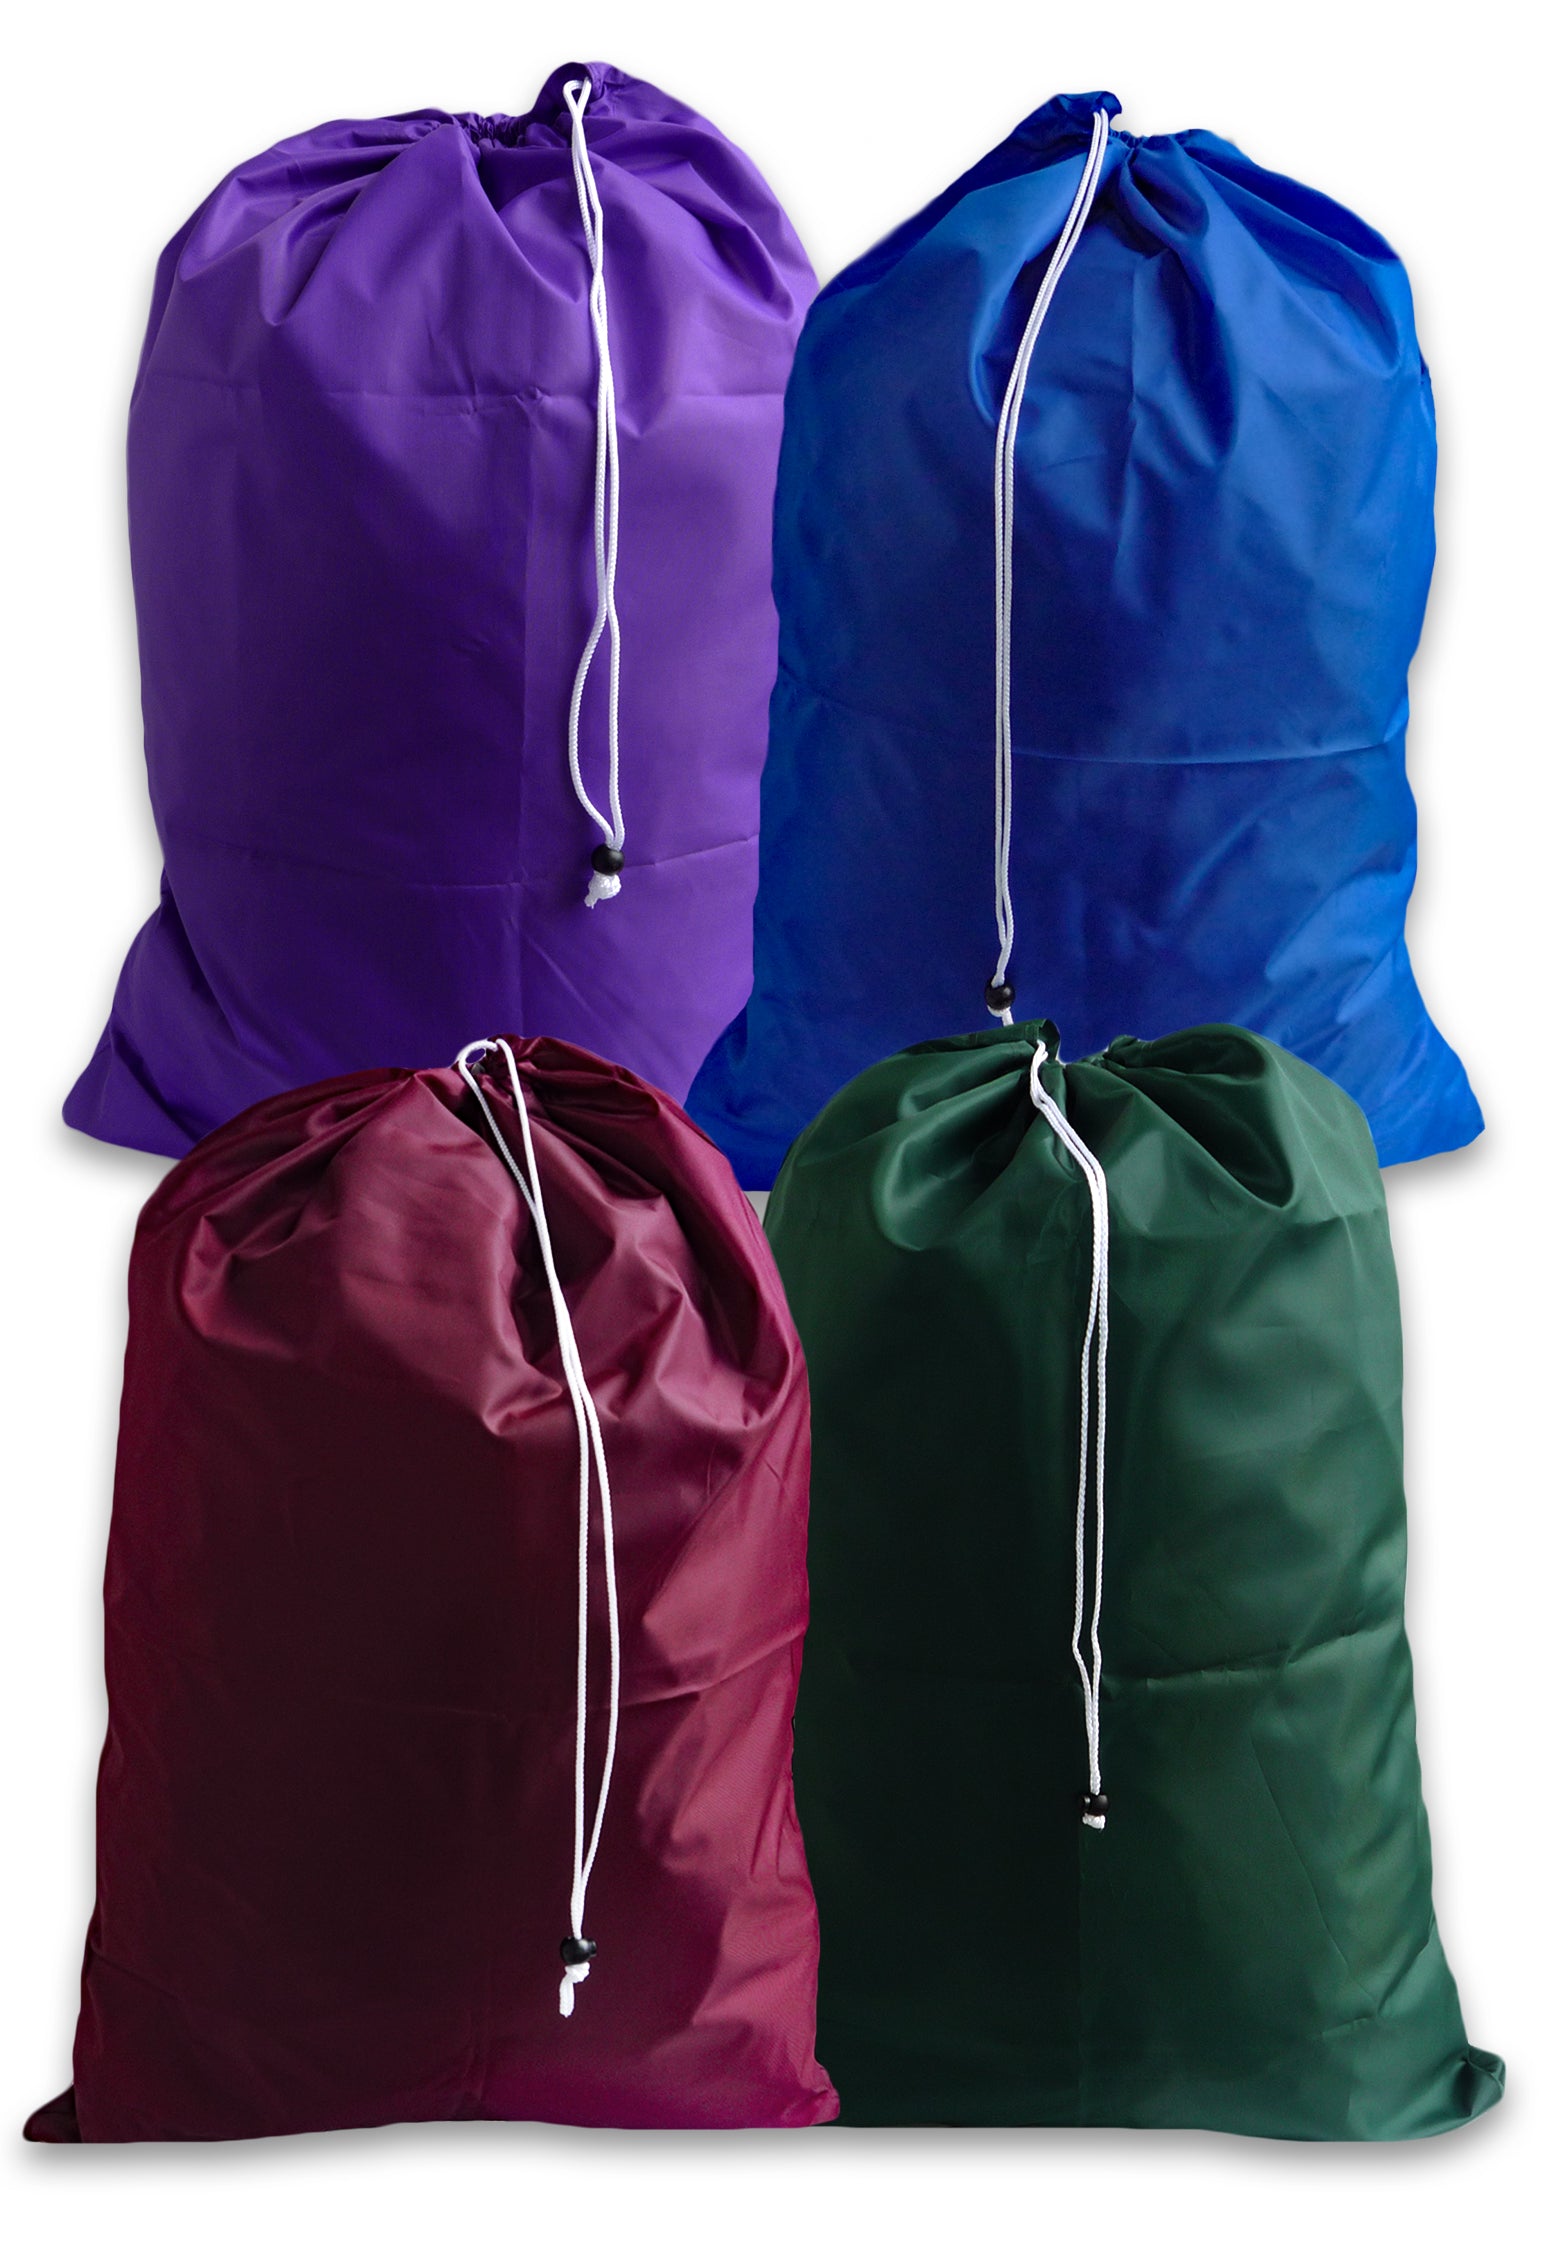 Small Drawstring Laundry Bags 100 Pack